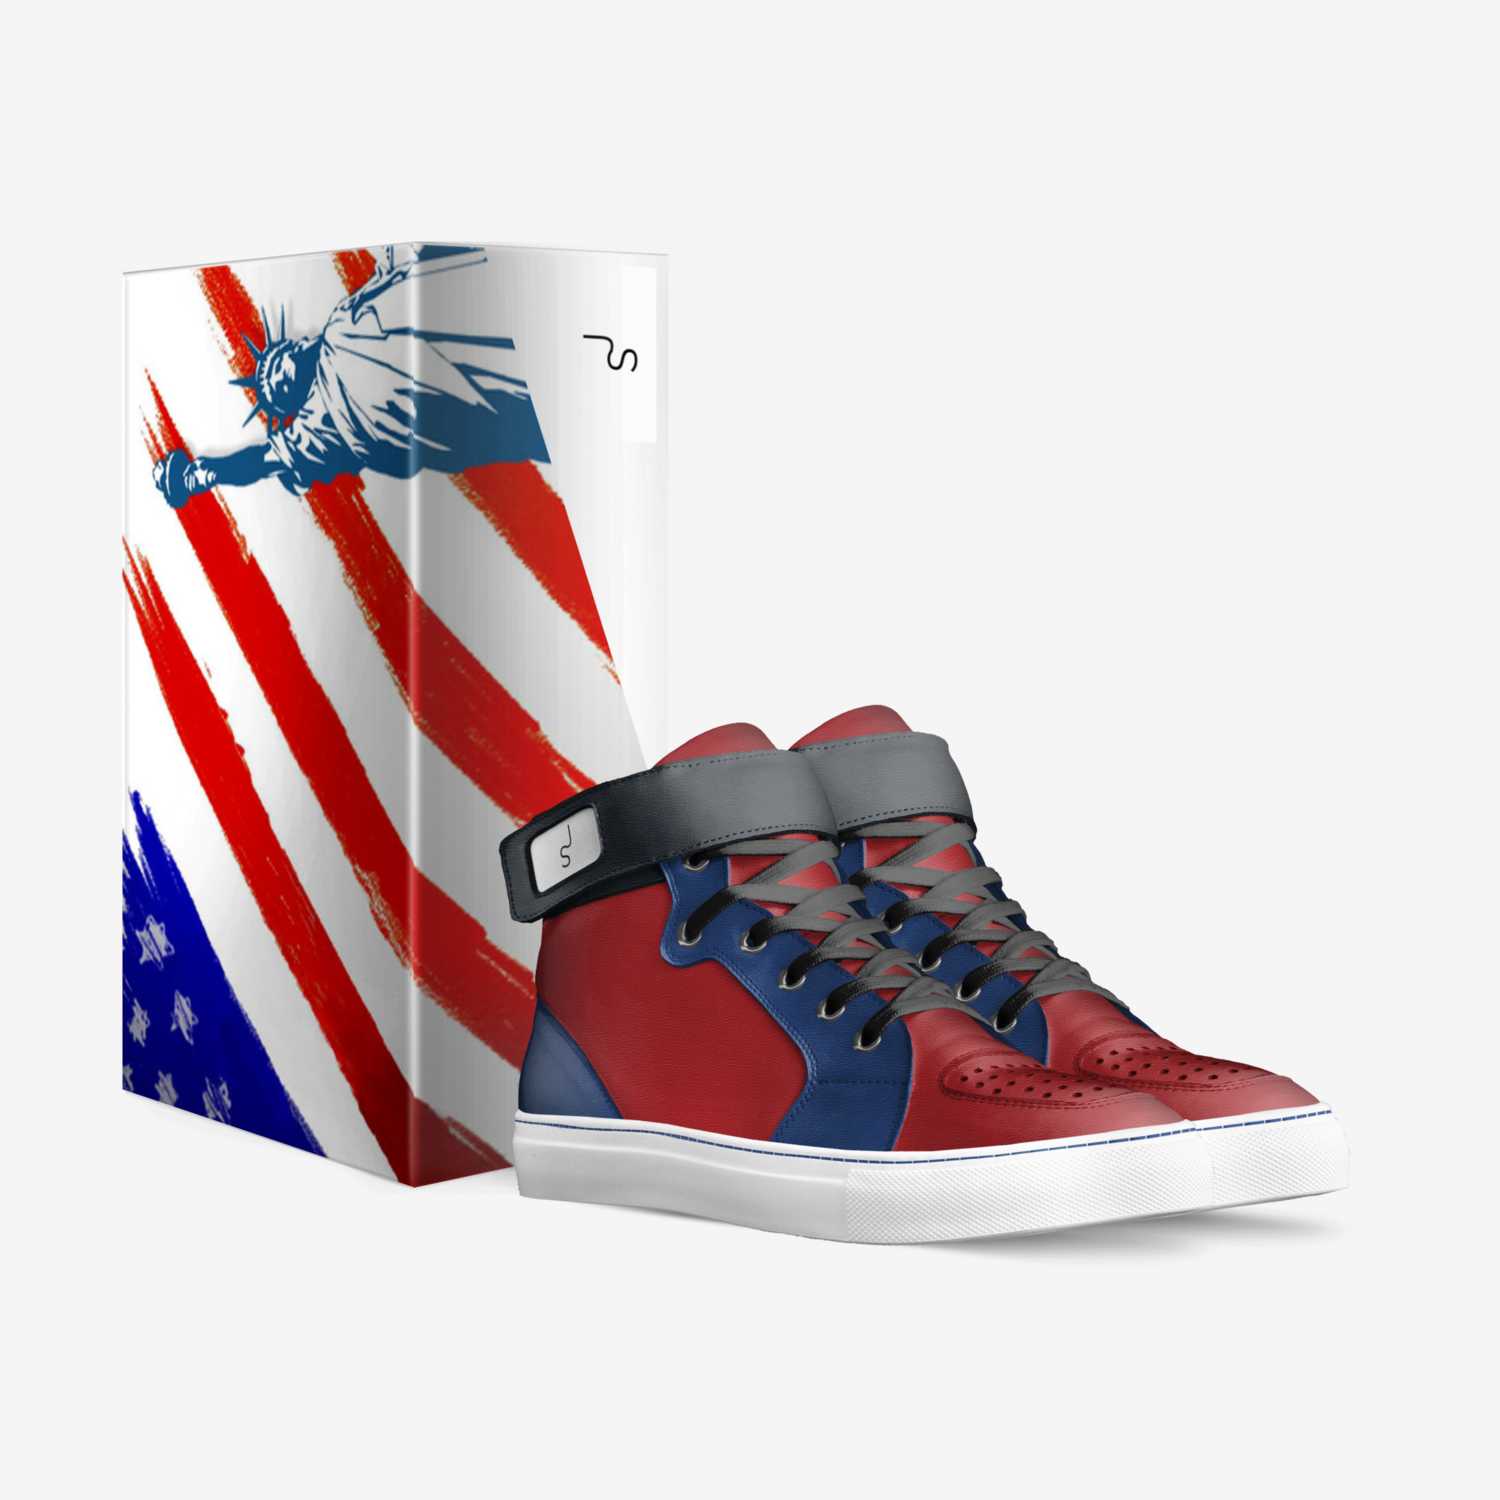 AMERICA SJ 1 custom made in Italy shoes by Sutton Shook | Box view